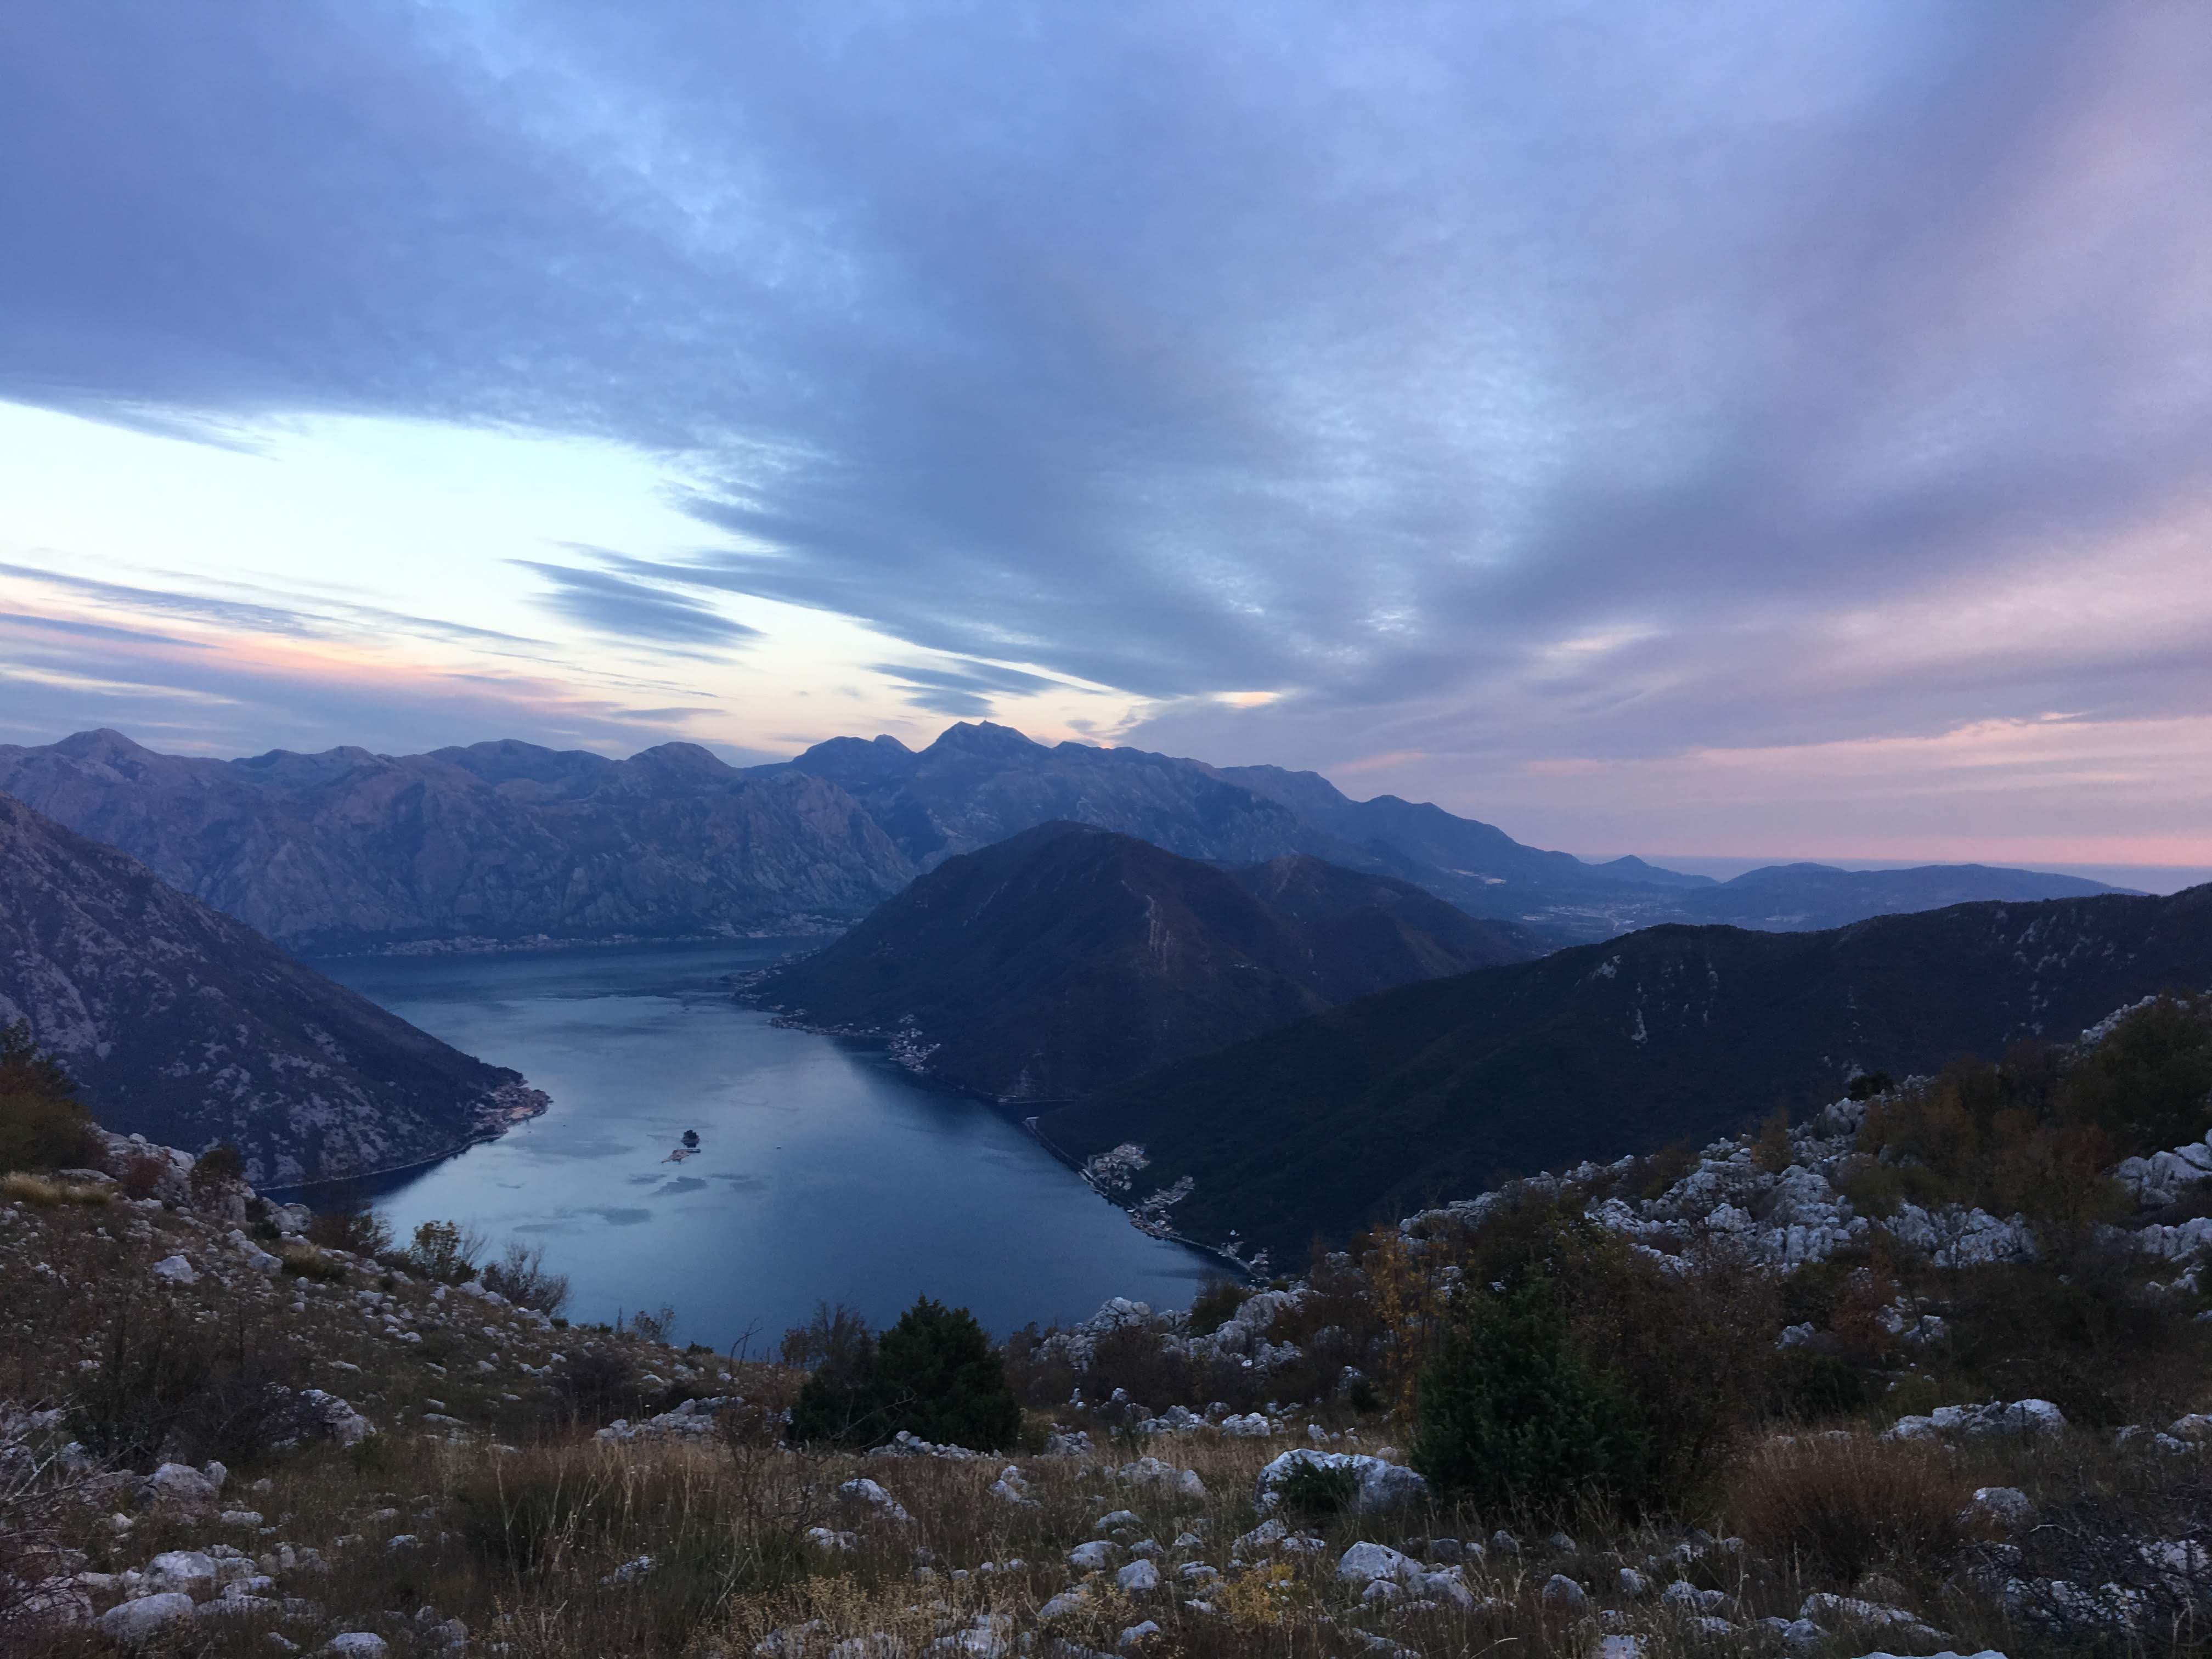 On the fringes of The Dinaric Alps in Montenegro, we'll explore the limestone mountains that overlook the inlet of the Adriatic Sea.